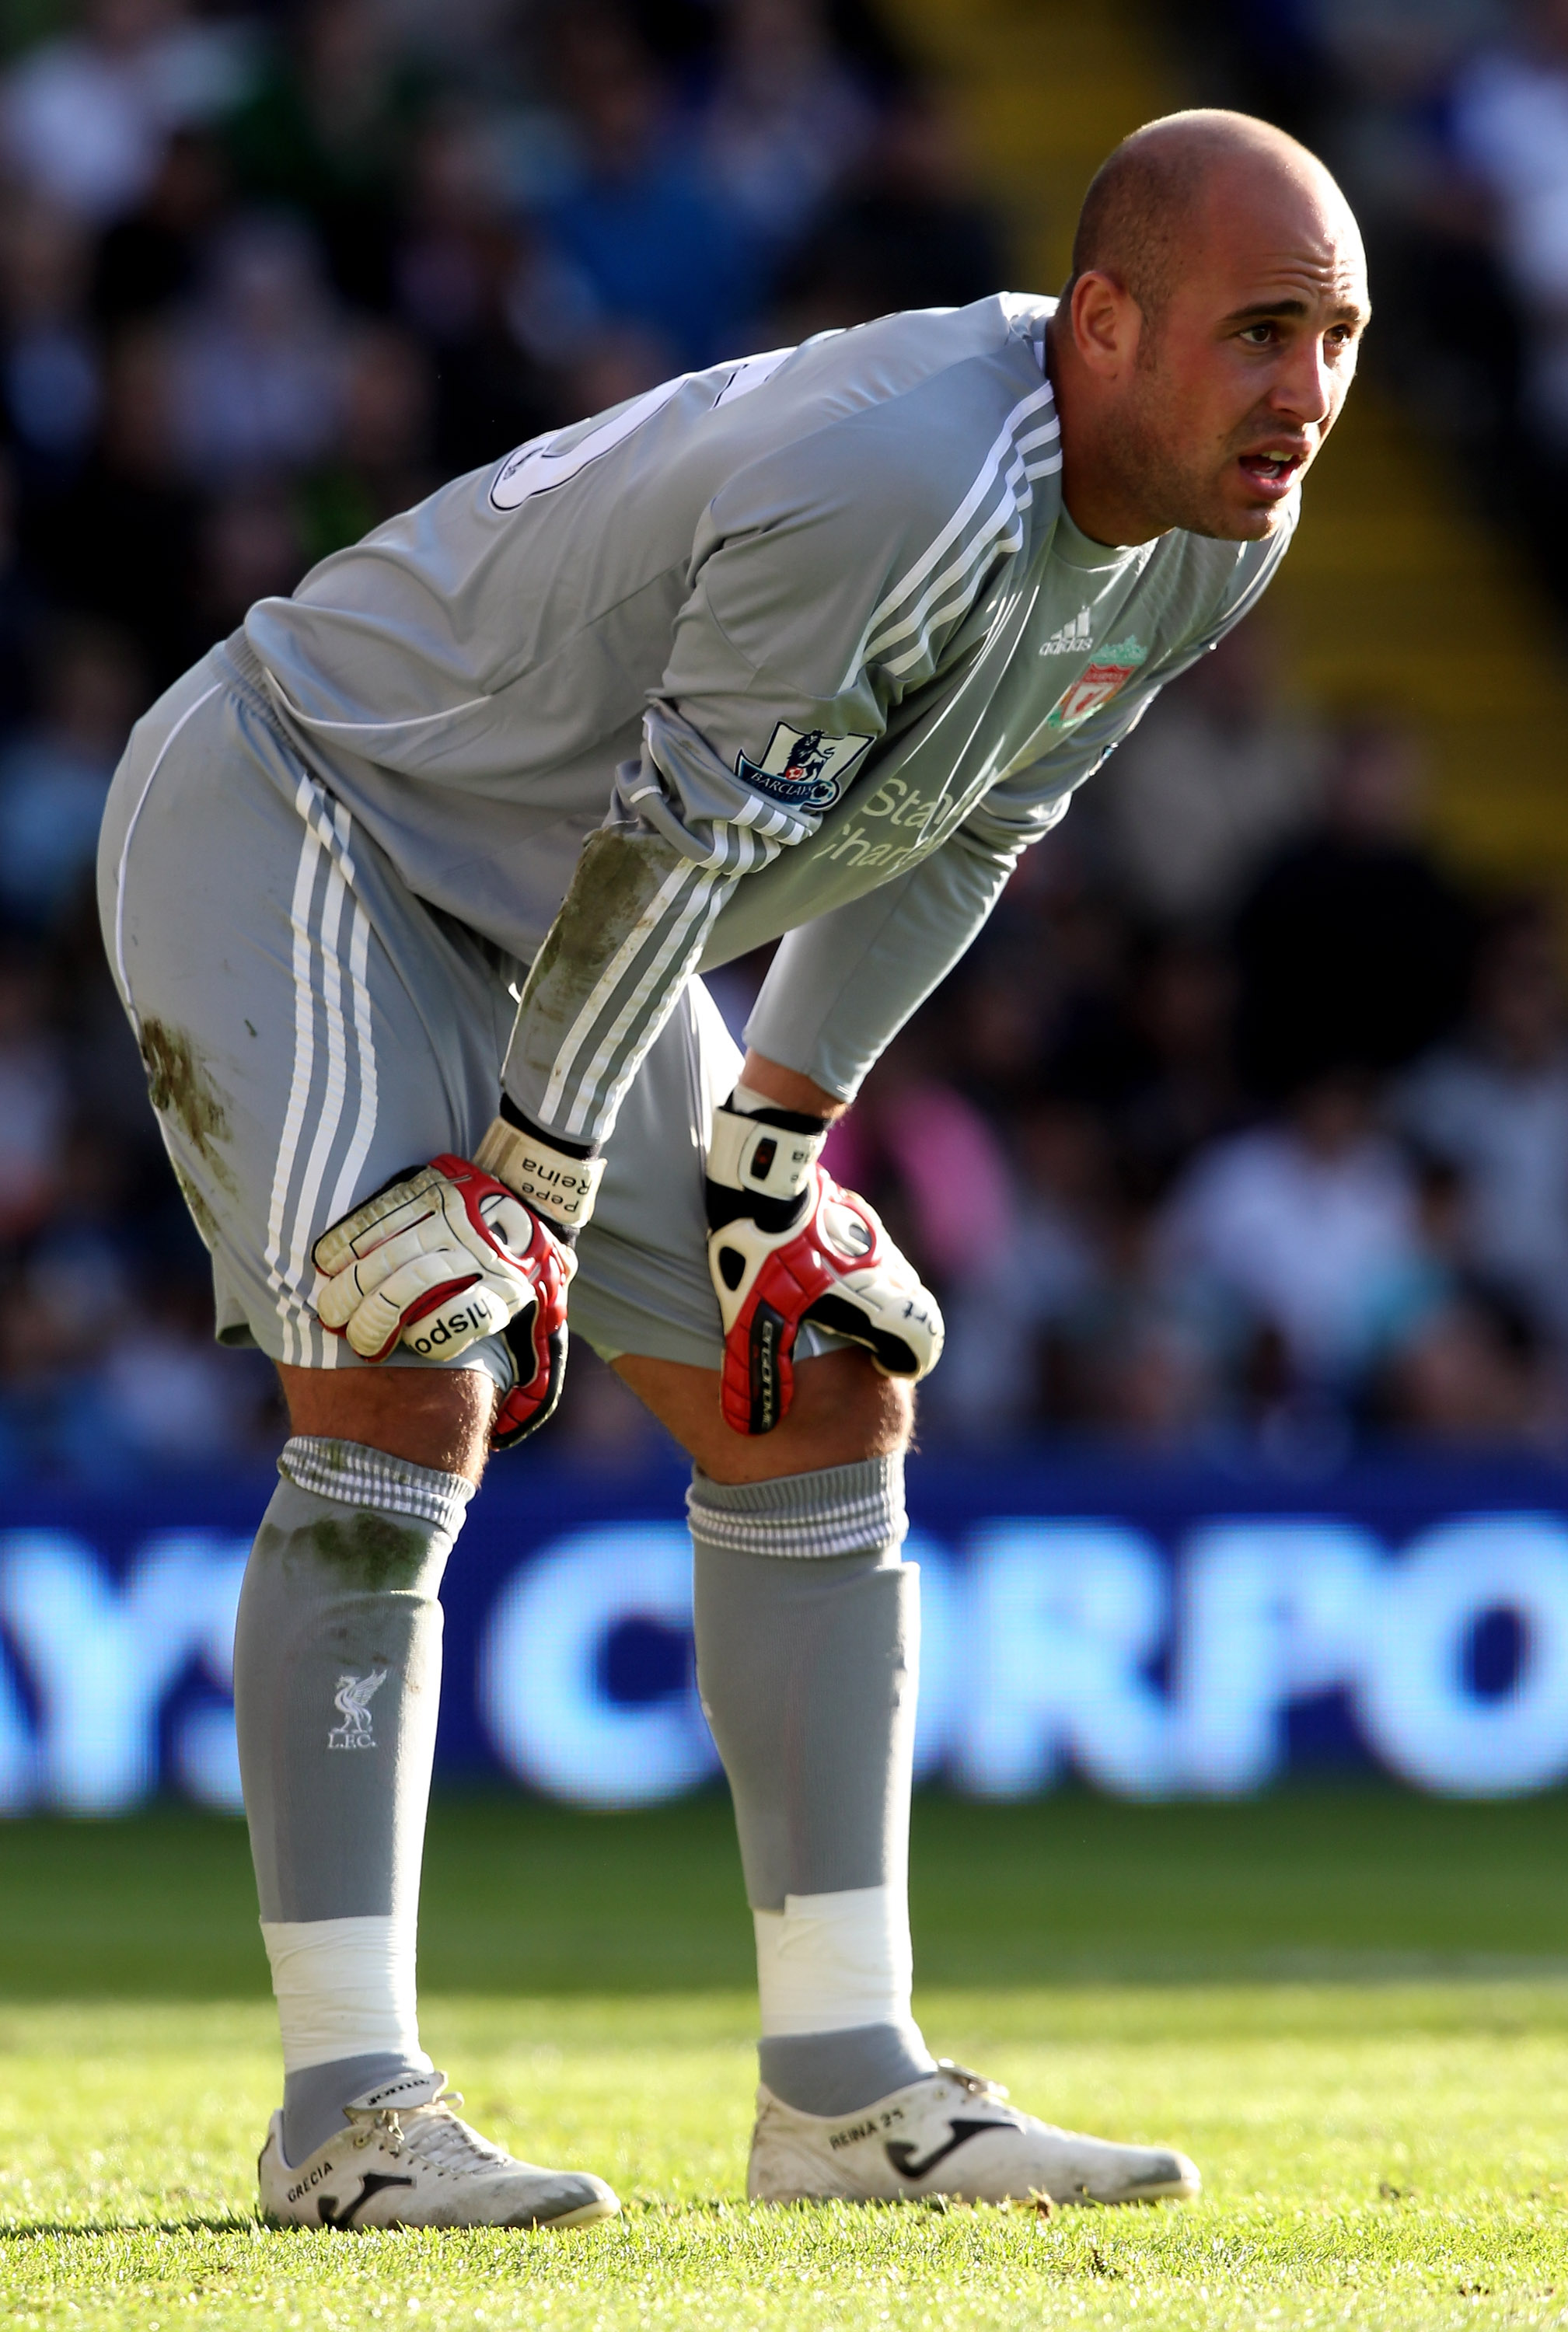 BIRMINGHAM, ENGLAND - SEPTEMBER 12:   Pepe Reina of Liverpool looks on during the Barclays Premier League match between Birmingham City and Liverpool at St Andrew's Stadium on September 12, 2010 in Birmingham, England. (Photo by Ross Kinnaird/Getty Images